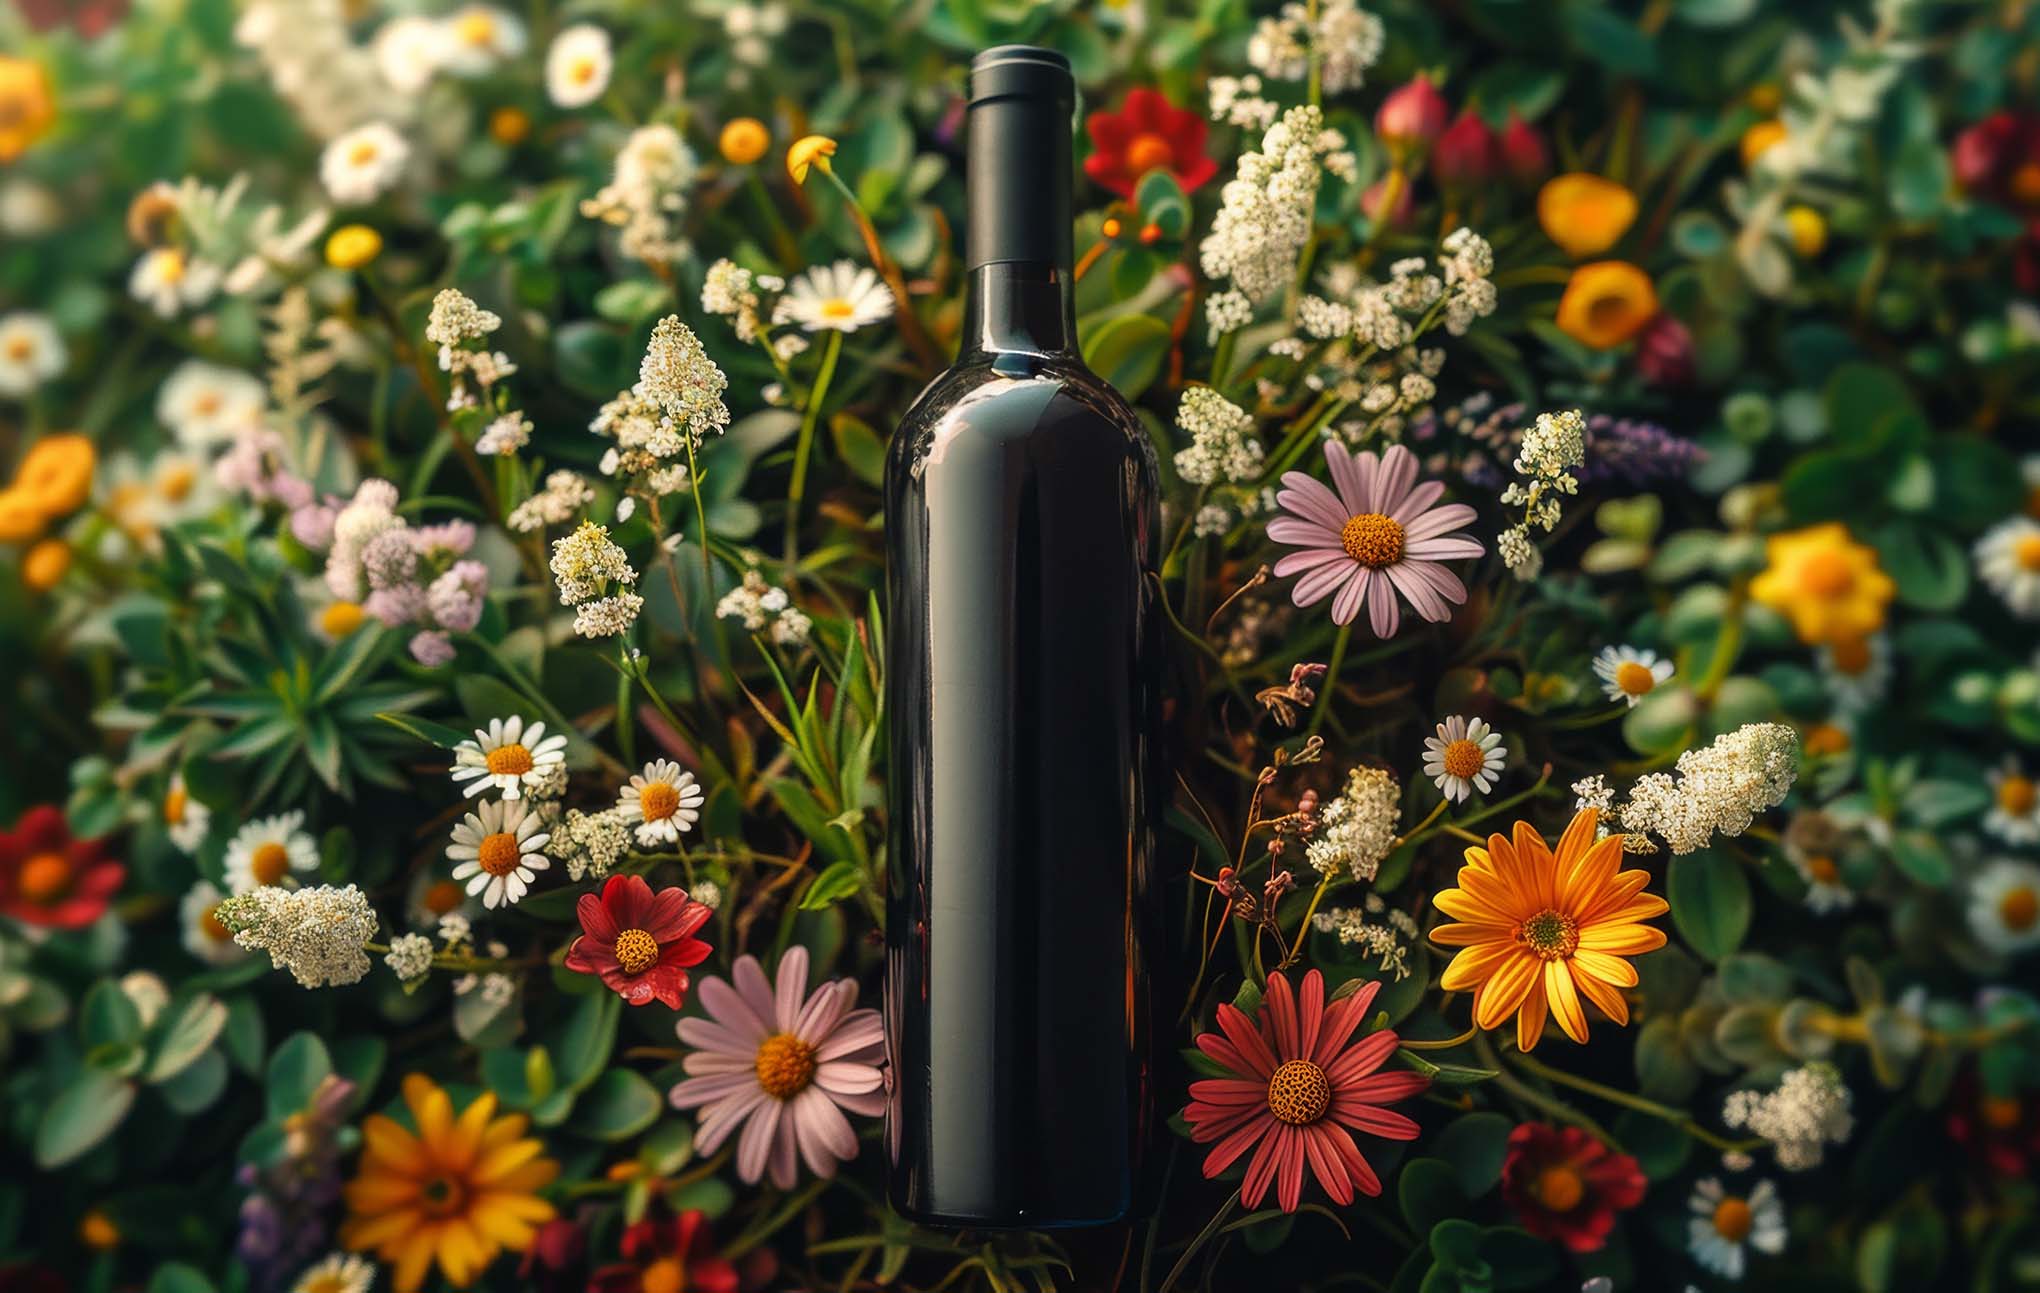 A dark wine bottle centered among a vibrant garden of colorful flowers, including daisies and other assorted blooms, creating a lush and aromatic setting on a Commerce7 website.